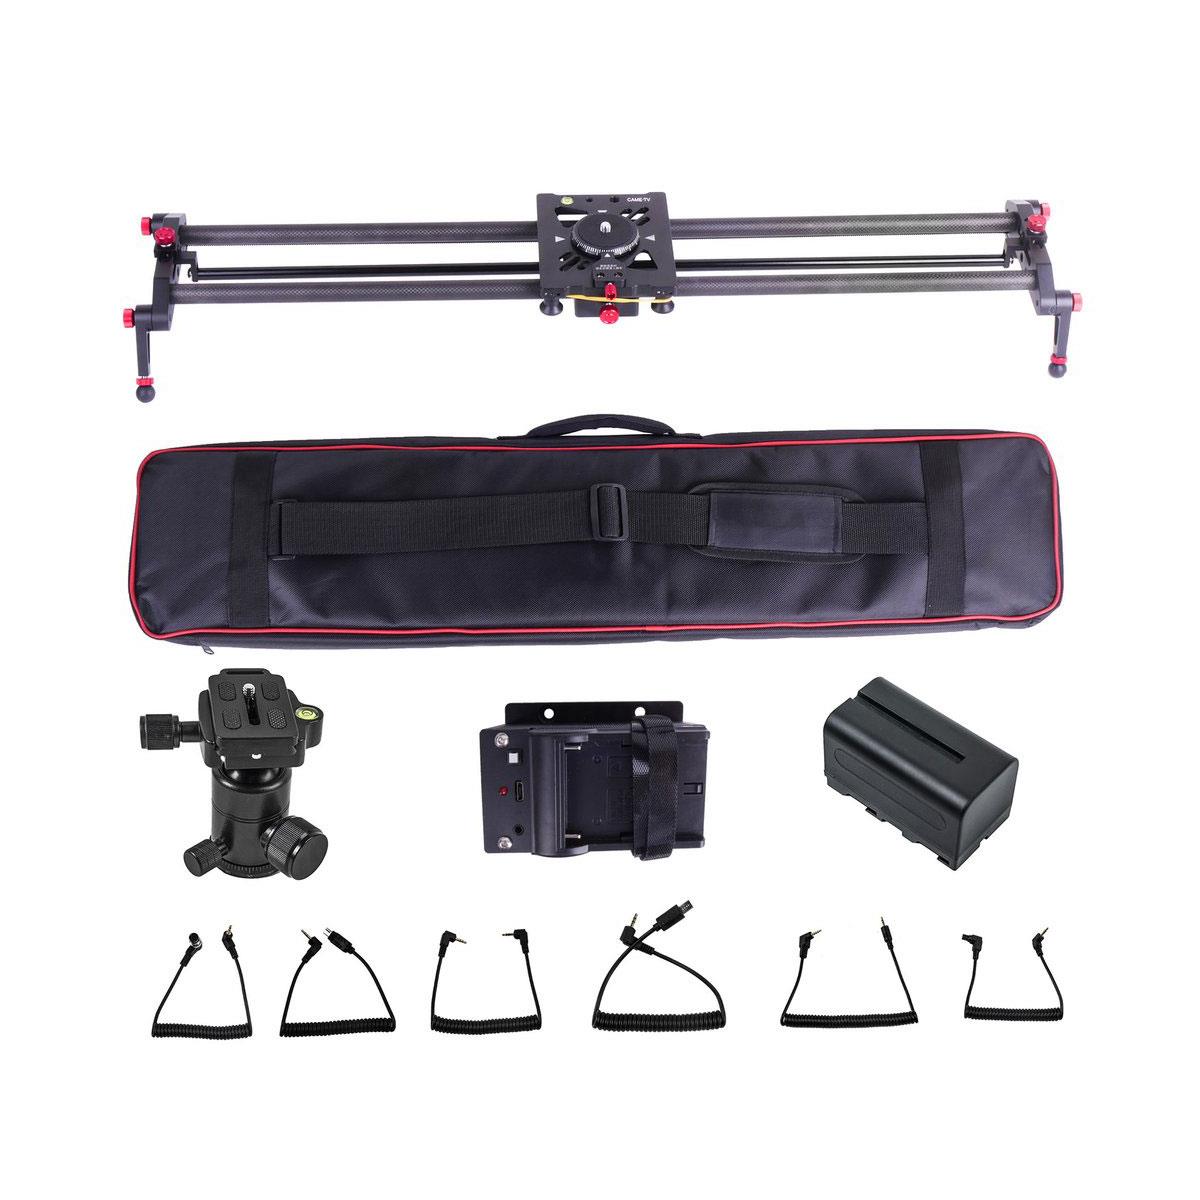 

Came-TV 100cm Motorized Parallax Slider with Bluetooth